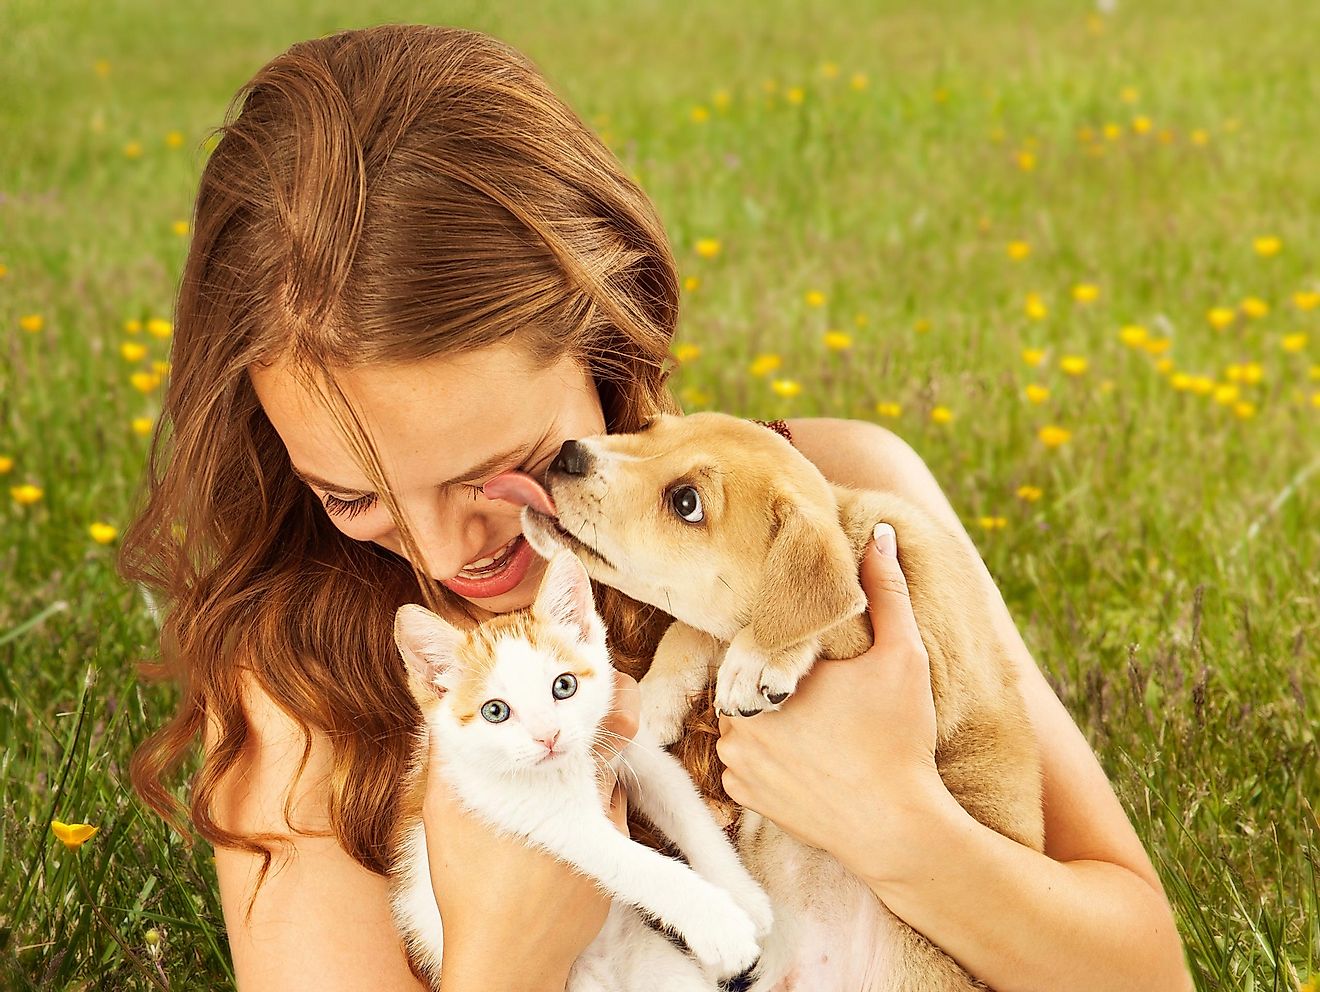 The majority of the pet owners in the United States own dogs and cats.